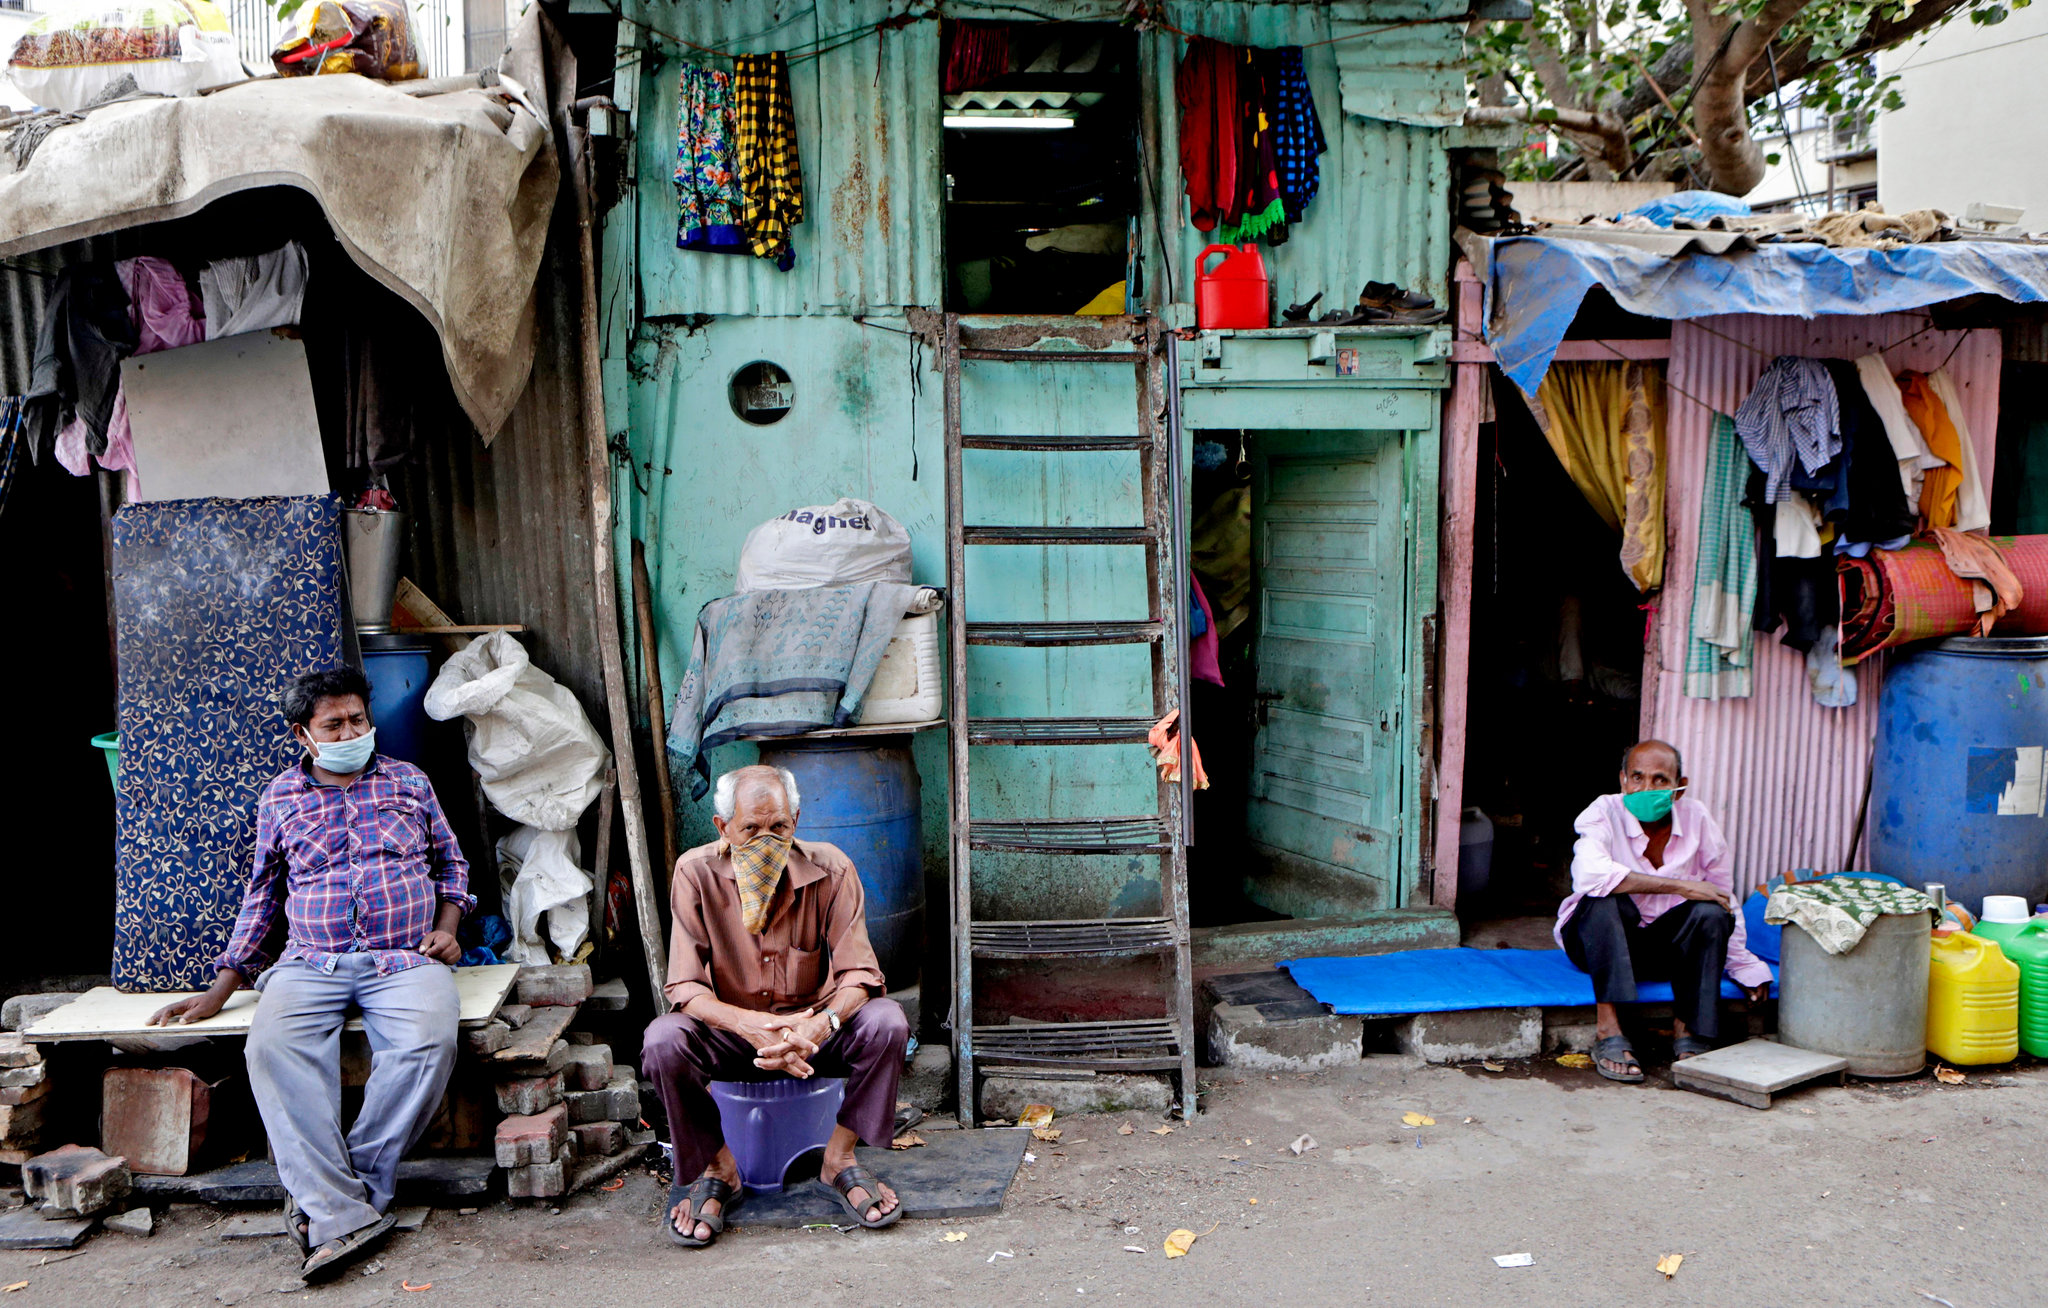 Urban Slums in India: Improving Redevelopment and Relocation Policies